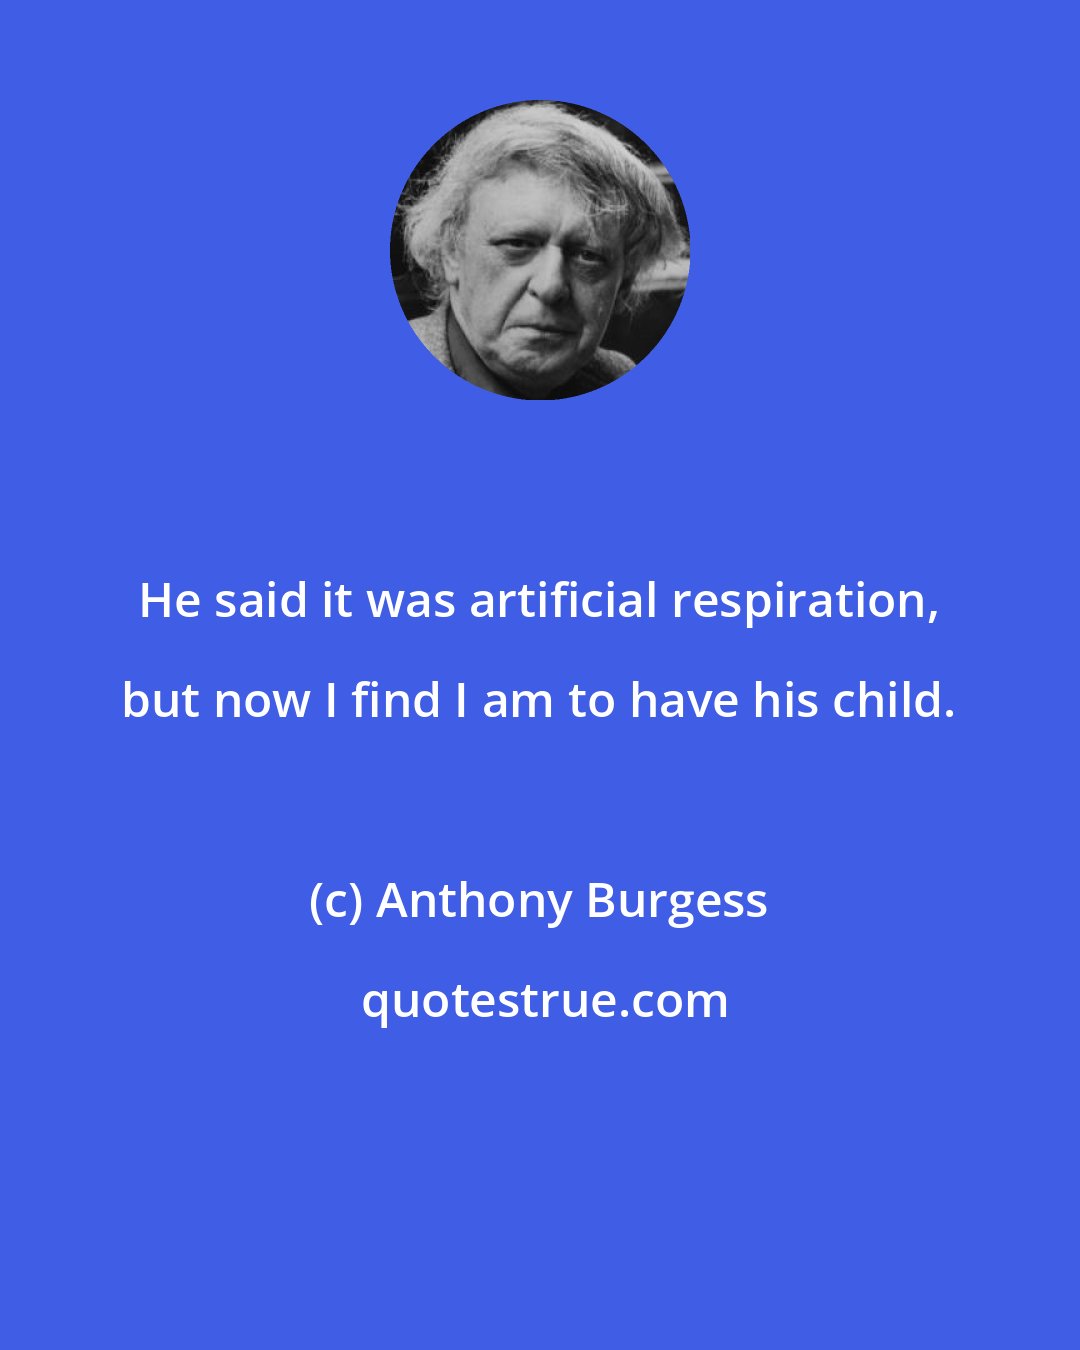 Anthony Burgess: He said it was artificial respiration, but now I find I am to have his child.